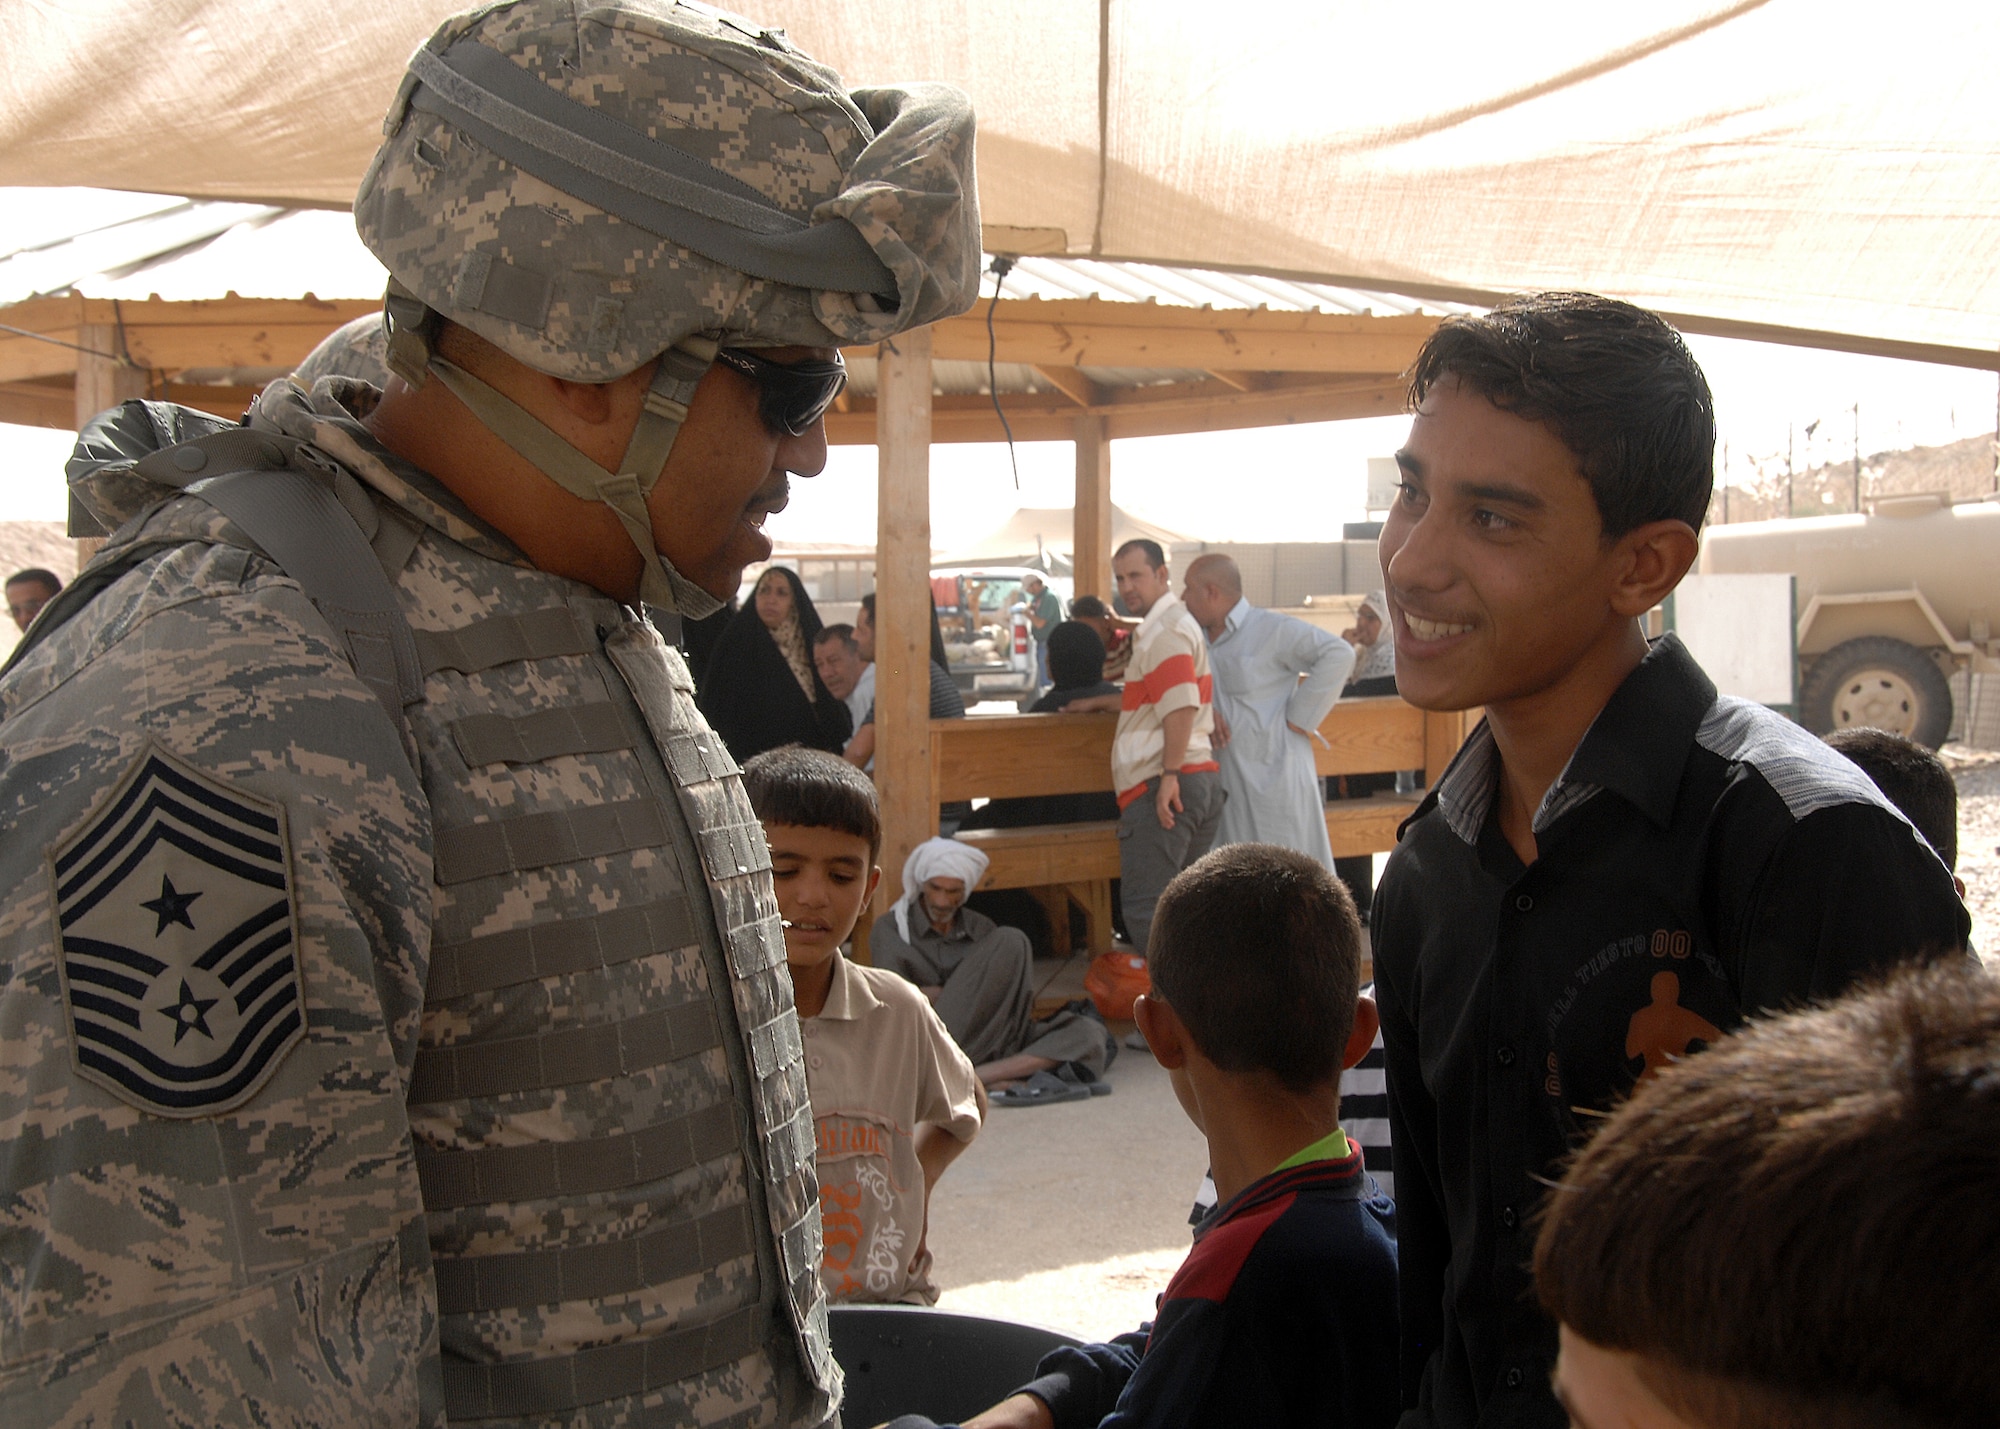 Camp Bucca, Iraq -- Chief Master Sgt. Jeffrey Antwine, 386th Air Expeditionary Wing command chief, jokes with a young Iraqi boy waiting to visit his father at the Theater Internment Facility (TIF) at Camp Bucca, Iraq, on Sept. 29. The 887th Expeditionary Security Forces Squadron controls access to detainees at the TIF and processes visitation procedures for family members. The Air Force works side by side with Army Soldiers in manning the facility, which houses more than 18,000 detainees. (U.S. Air Force photo/Tech. Sgt. Raheem Moore)